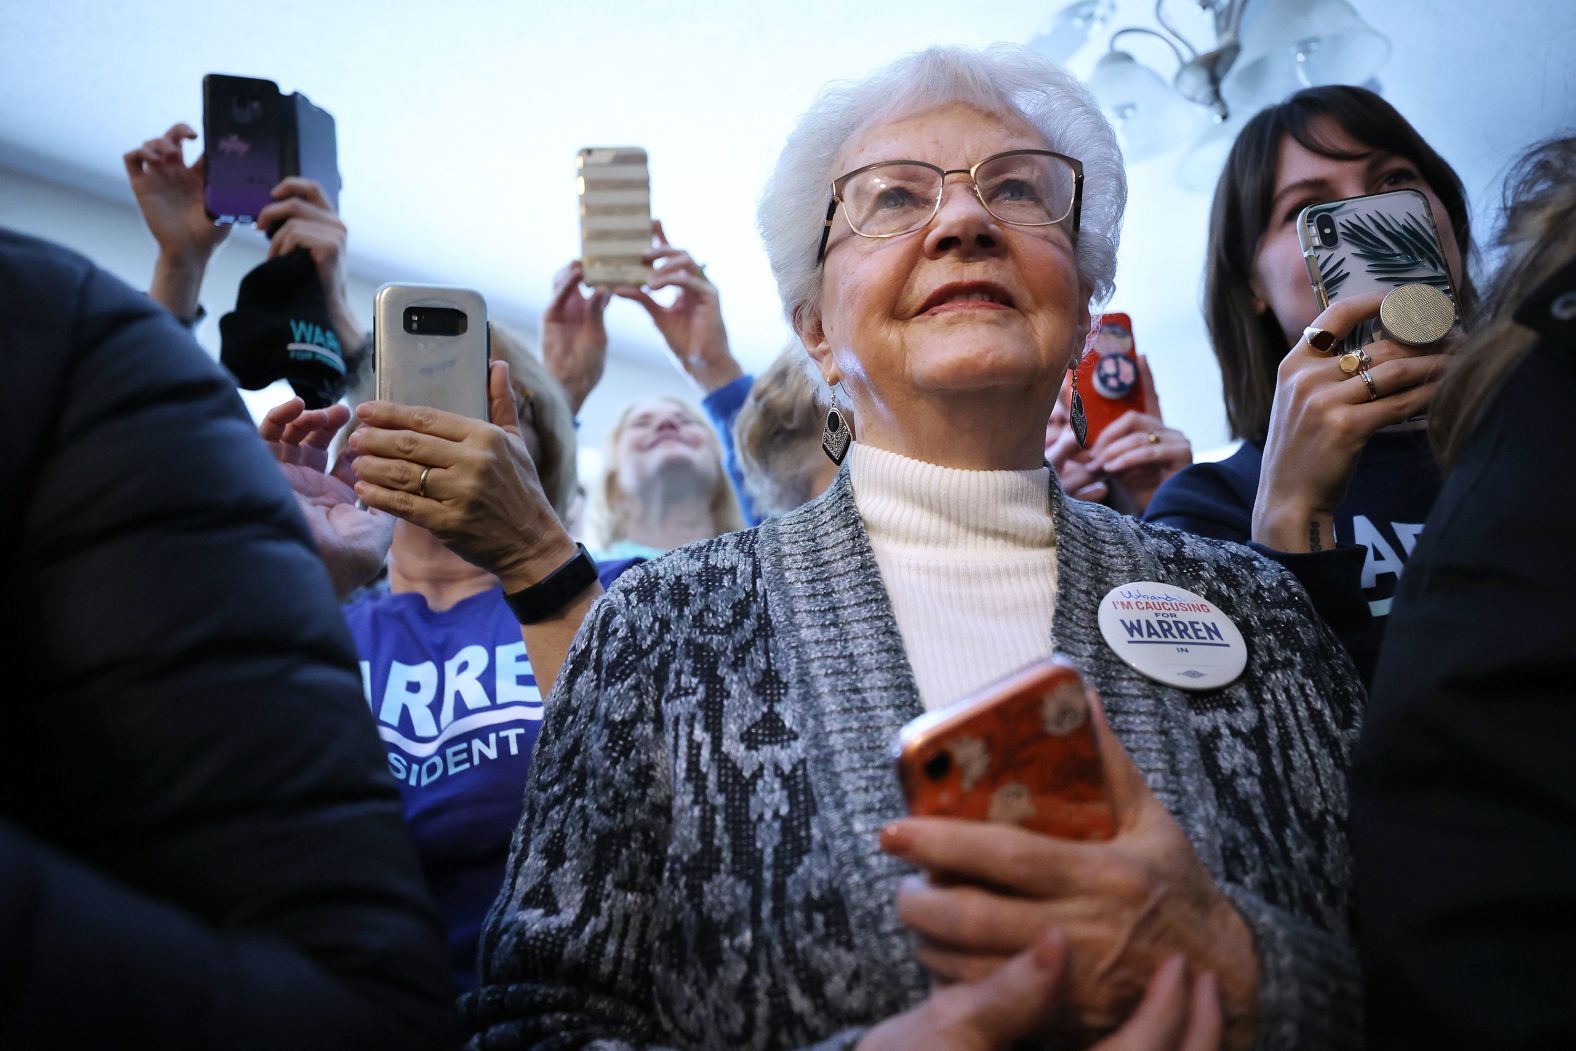 Campaign volunteers listen to Warren before going out to canvass voters in Urbandale, Iowa, on February 1.